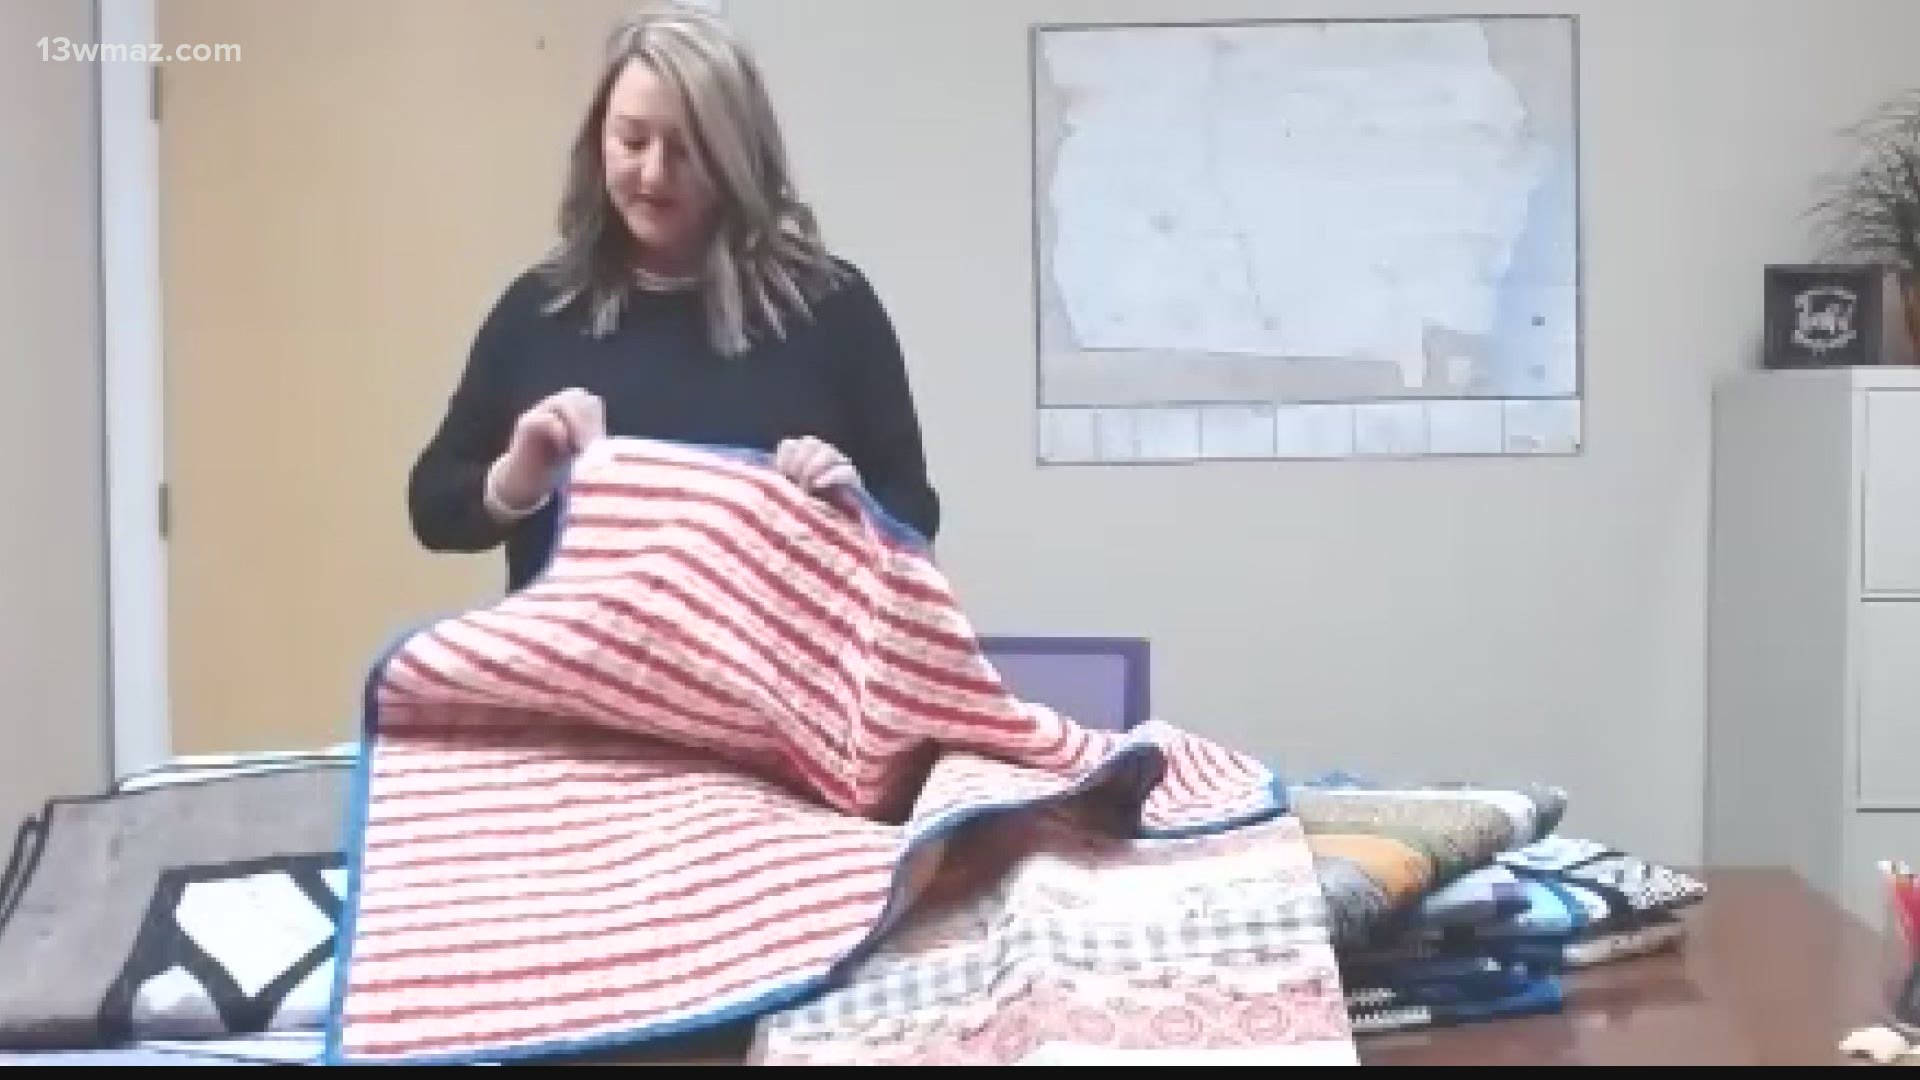 The Emerald City Quilters are working with Home Instead Senior Care to provide handmade quilts to their clients this winter.